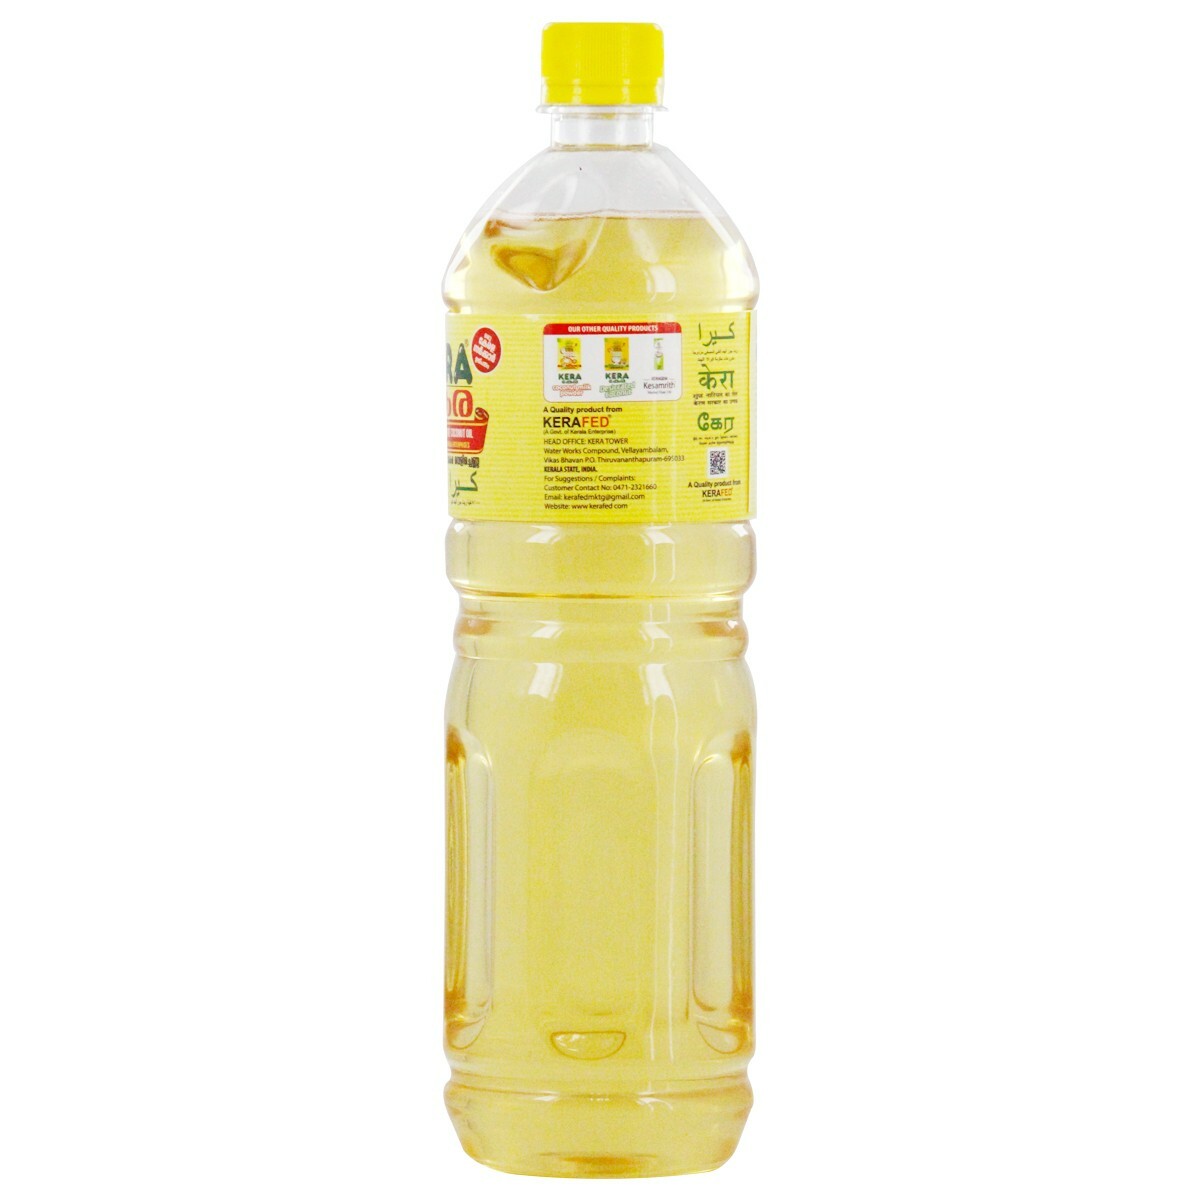 Kera Double Filtered Coconut Oil 1 Liter